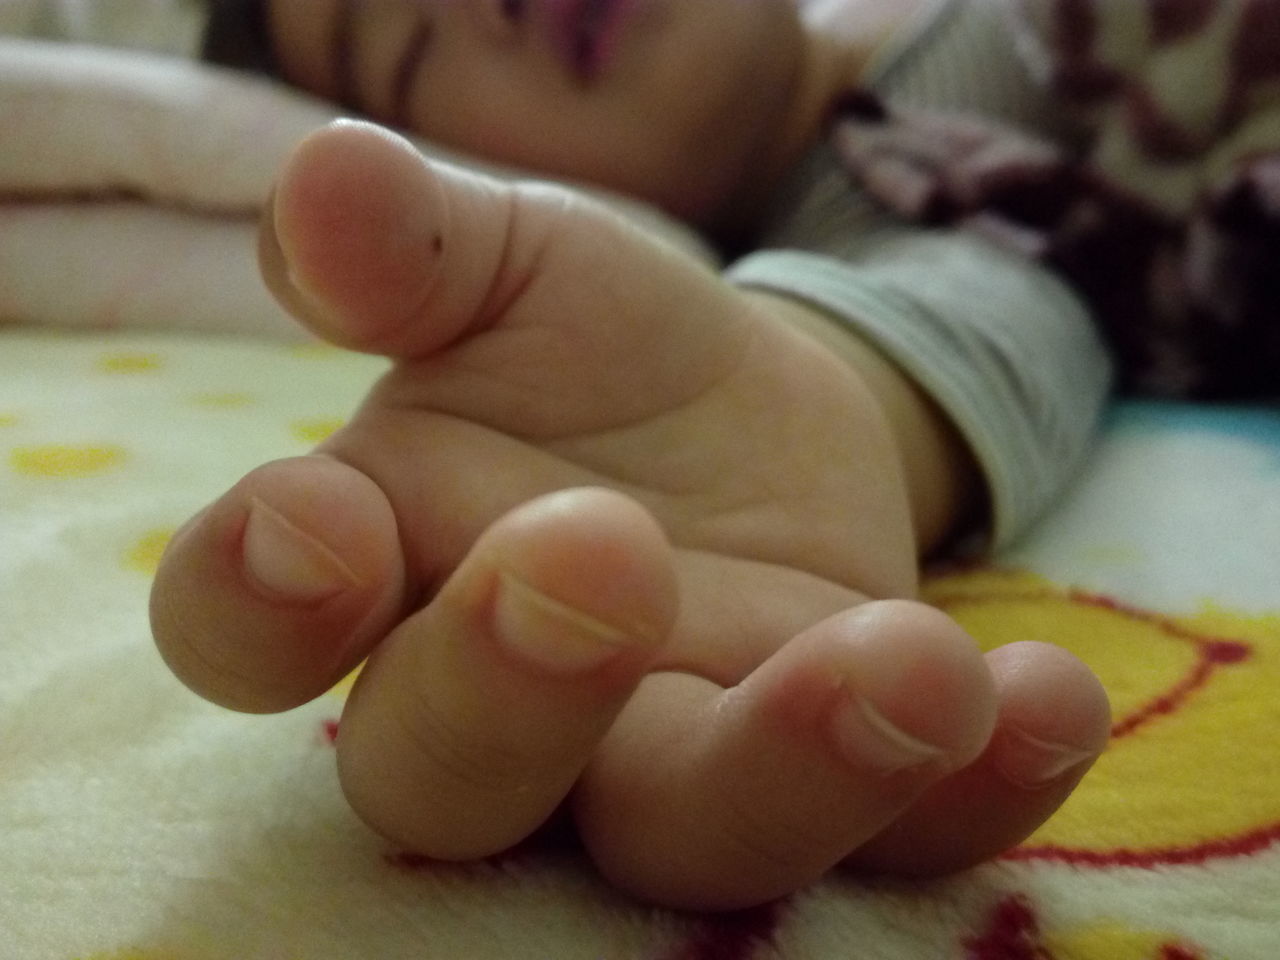 CLOSE-UP OF BABY LYING ON BED